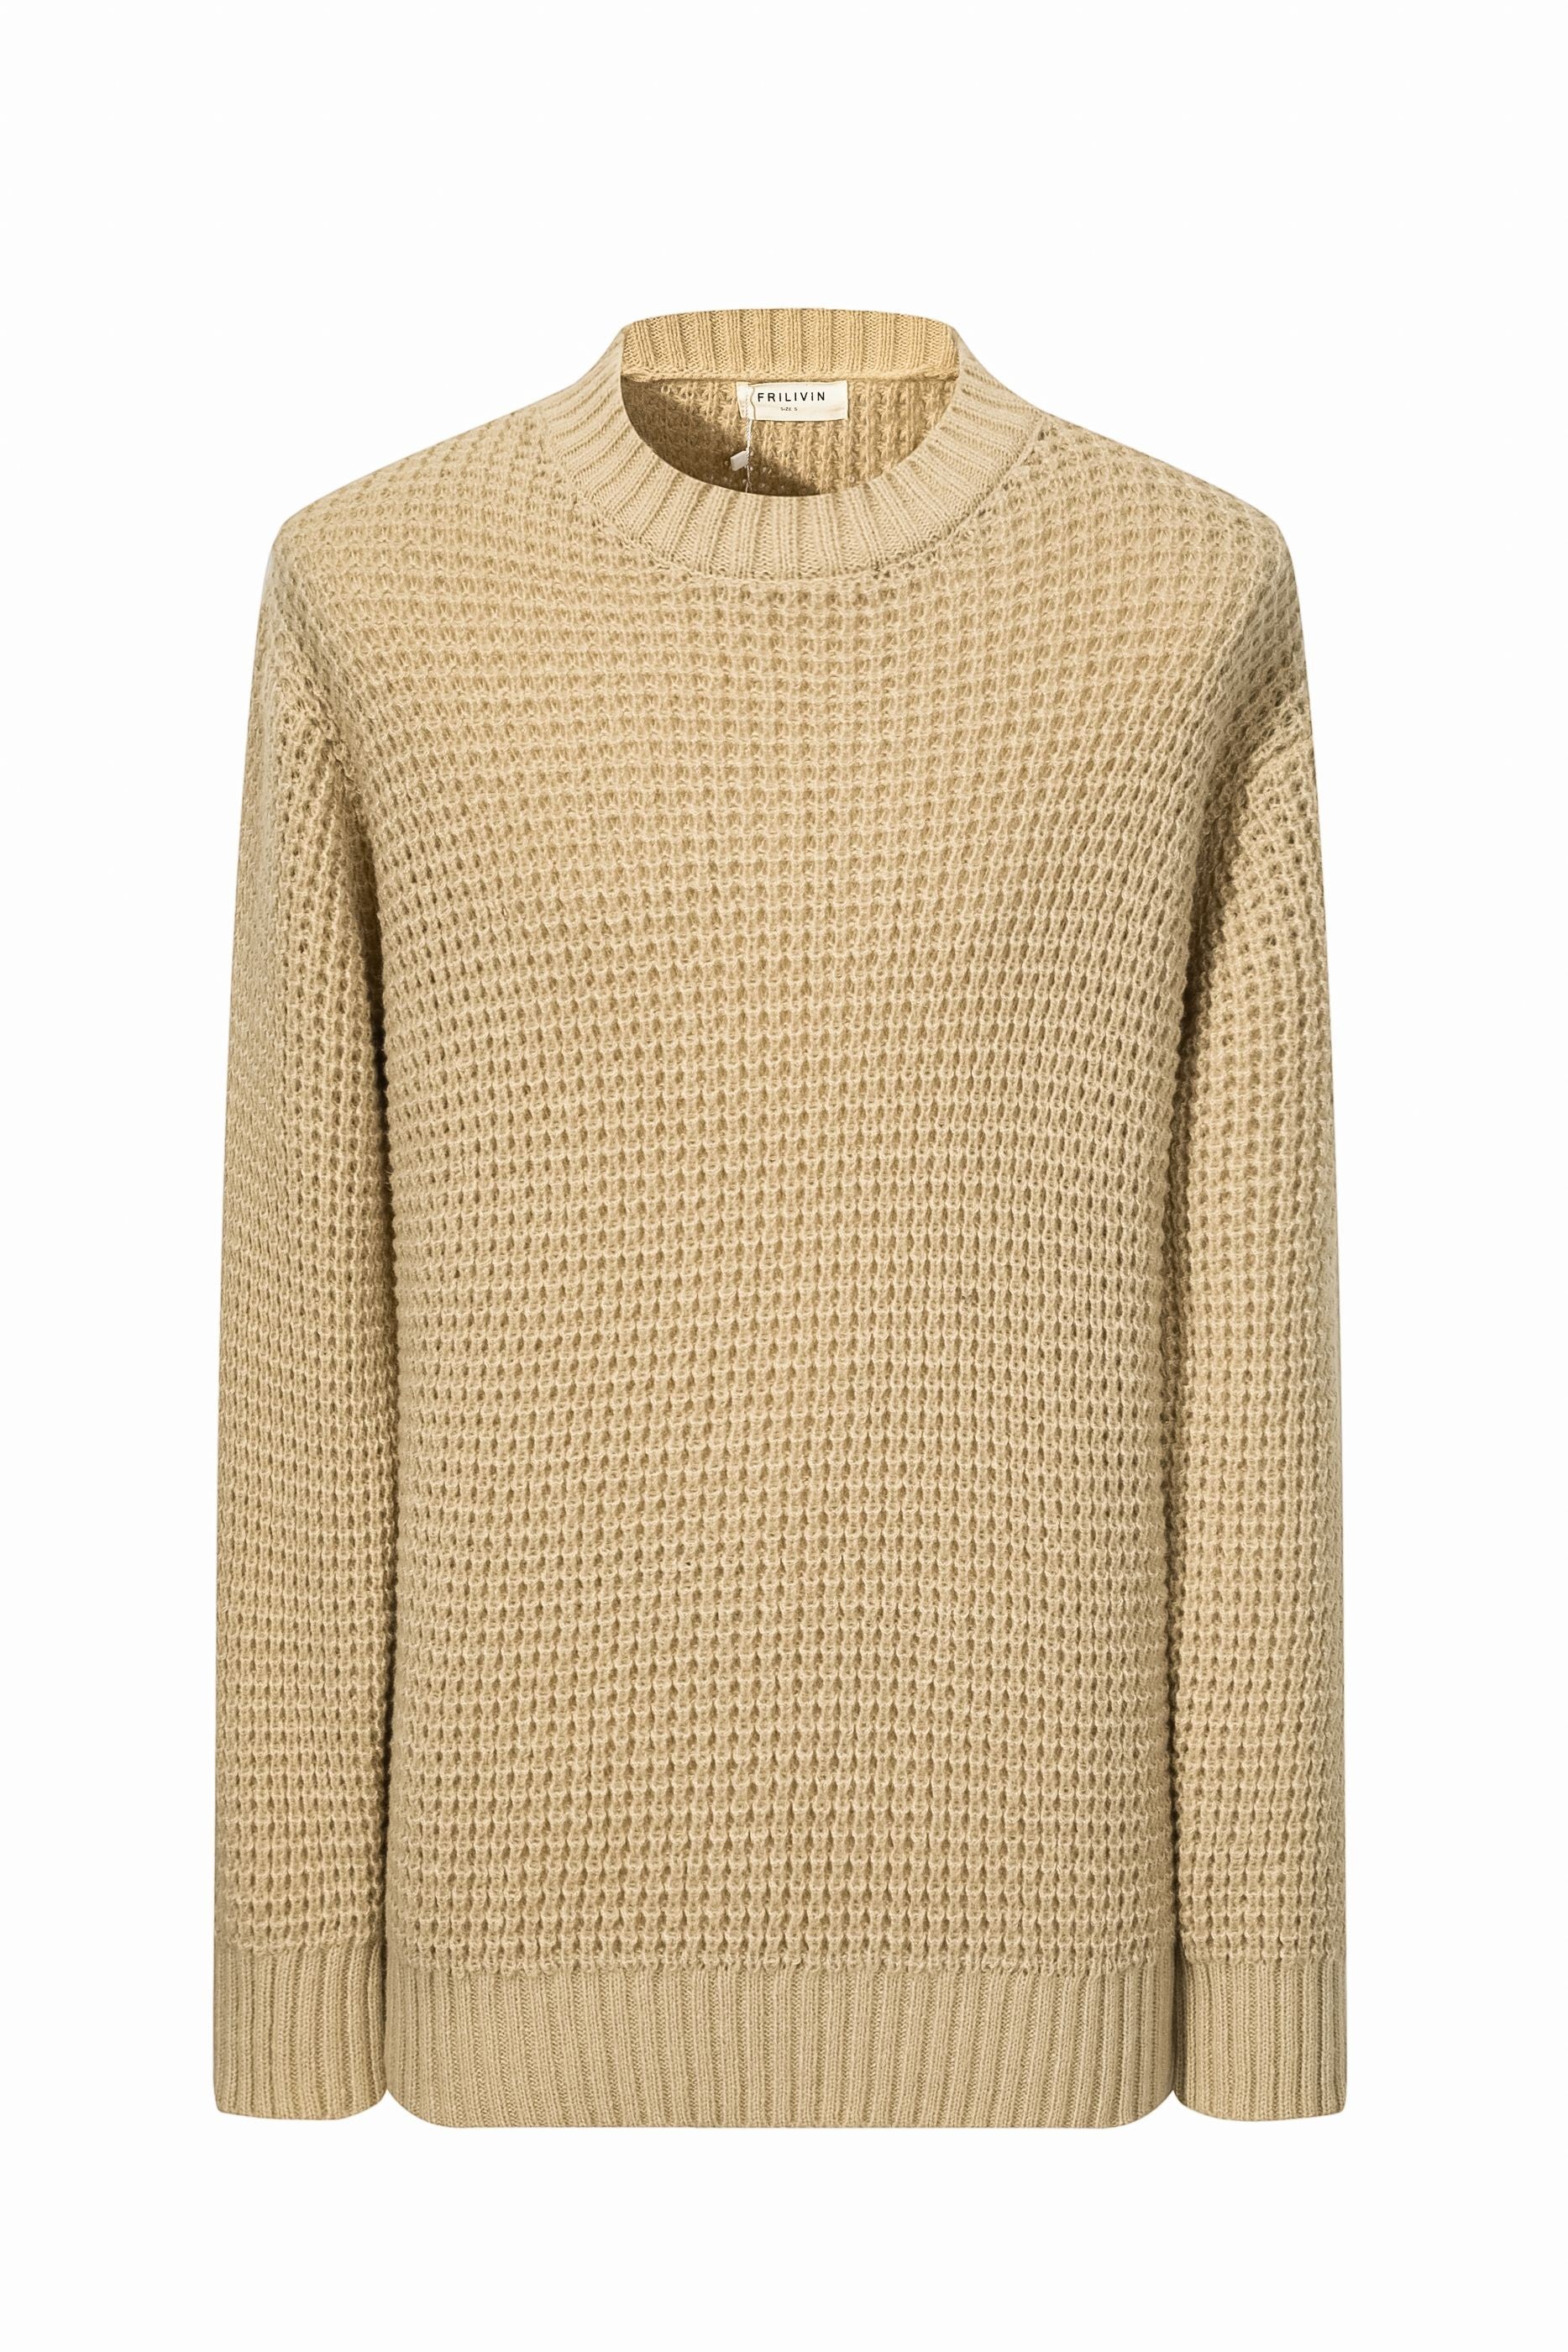 Pull maille tricot - Frilivin